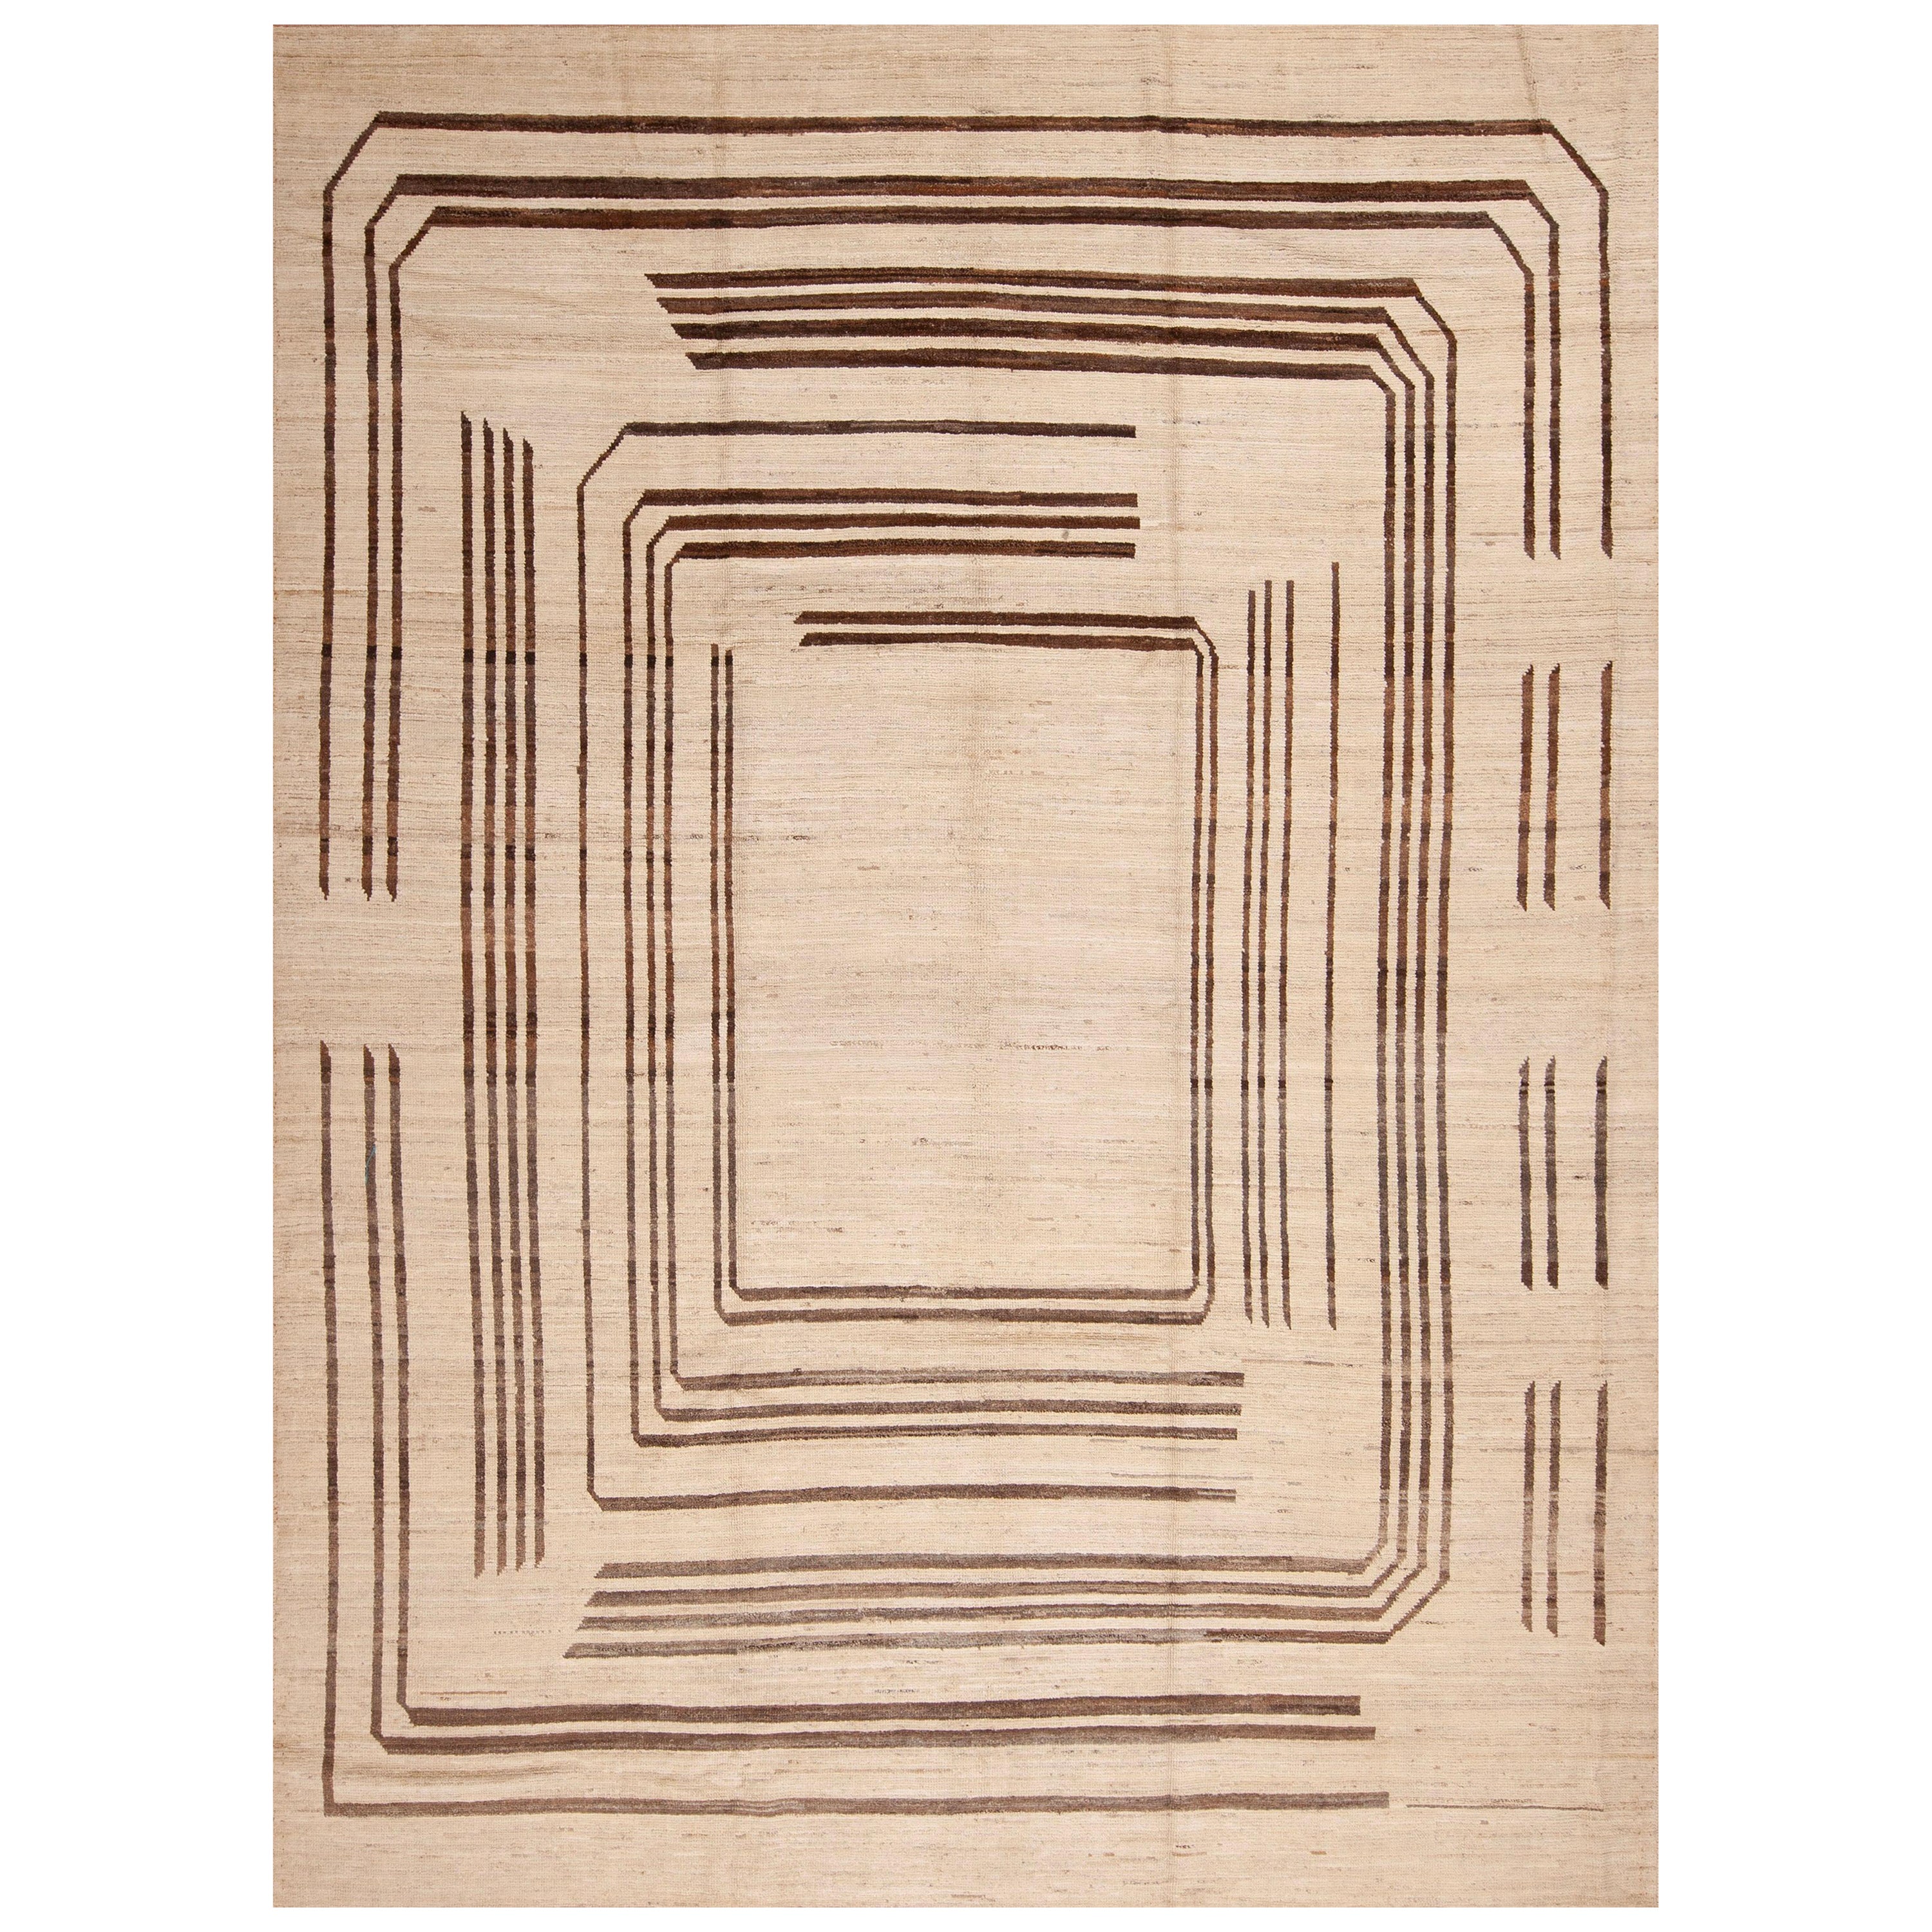 Nazmiyal Collection Geometric Square Modern Room Size Area Rug 8'7" x 11'9" For Sale